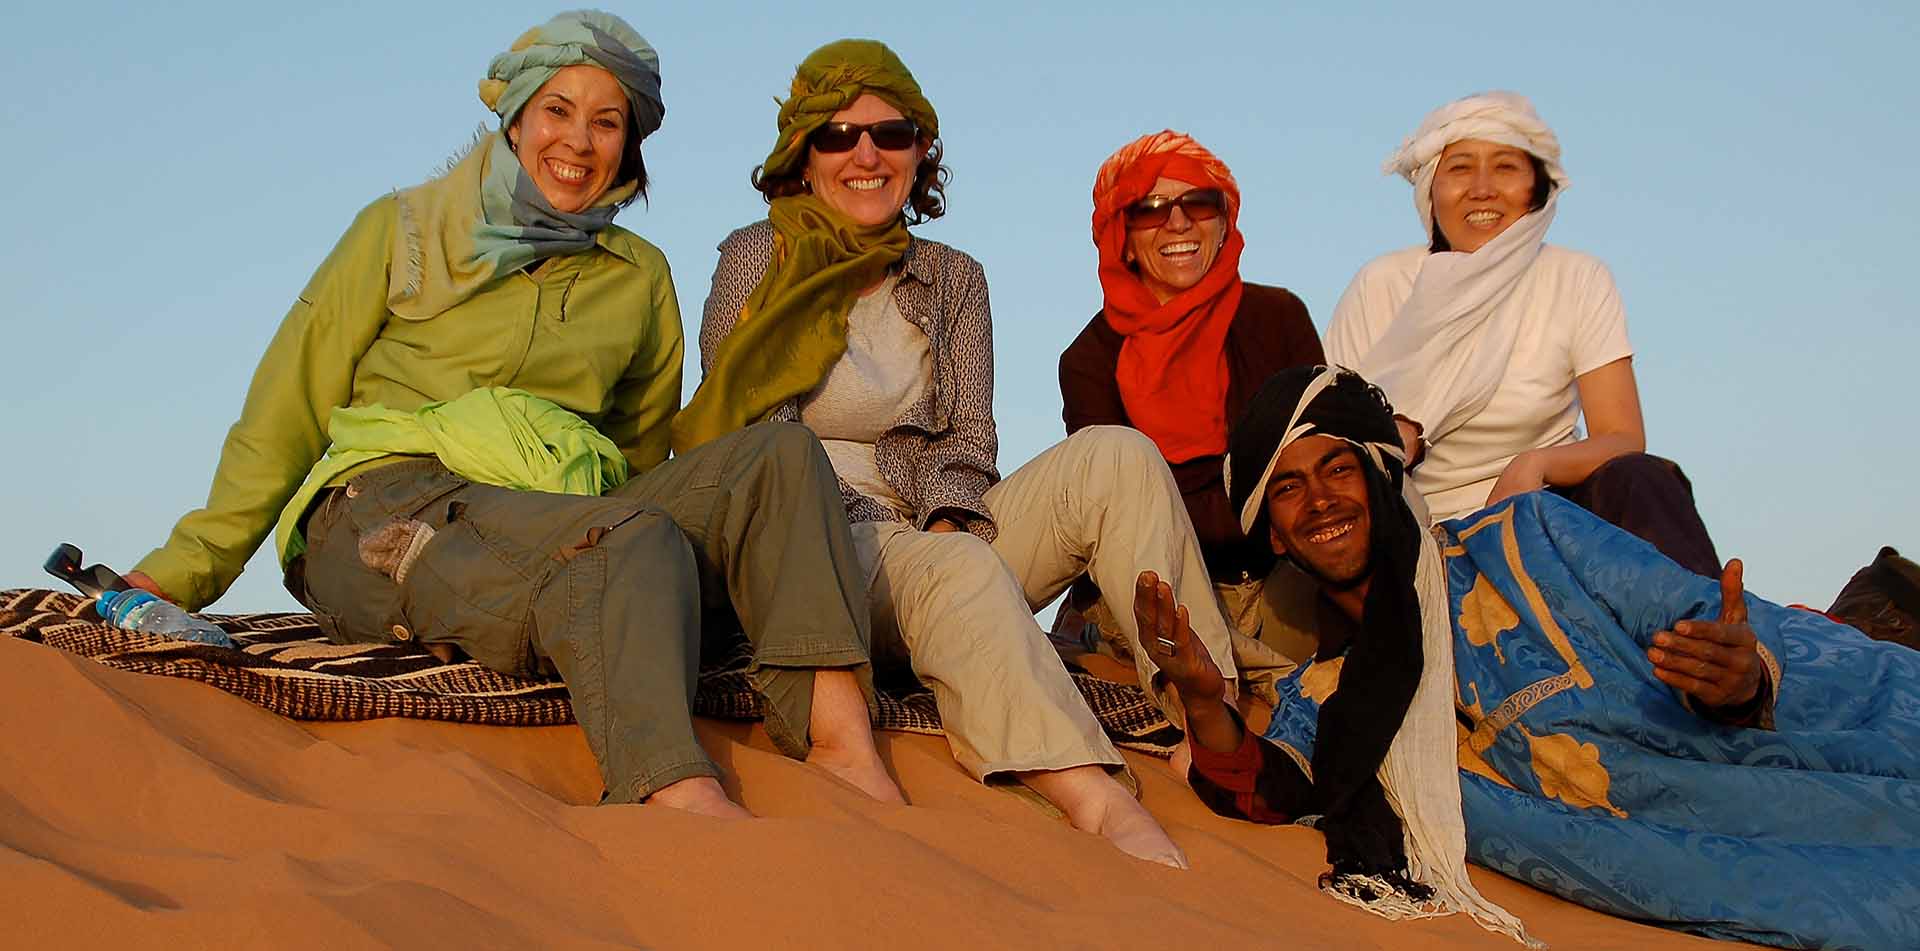 Classic Journeys Guide Saida with Travelers on Sand Dune in Morocco